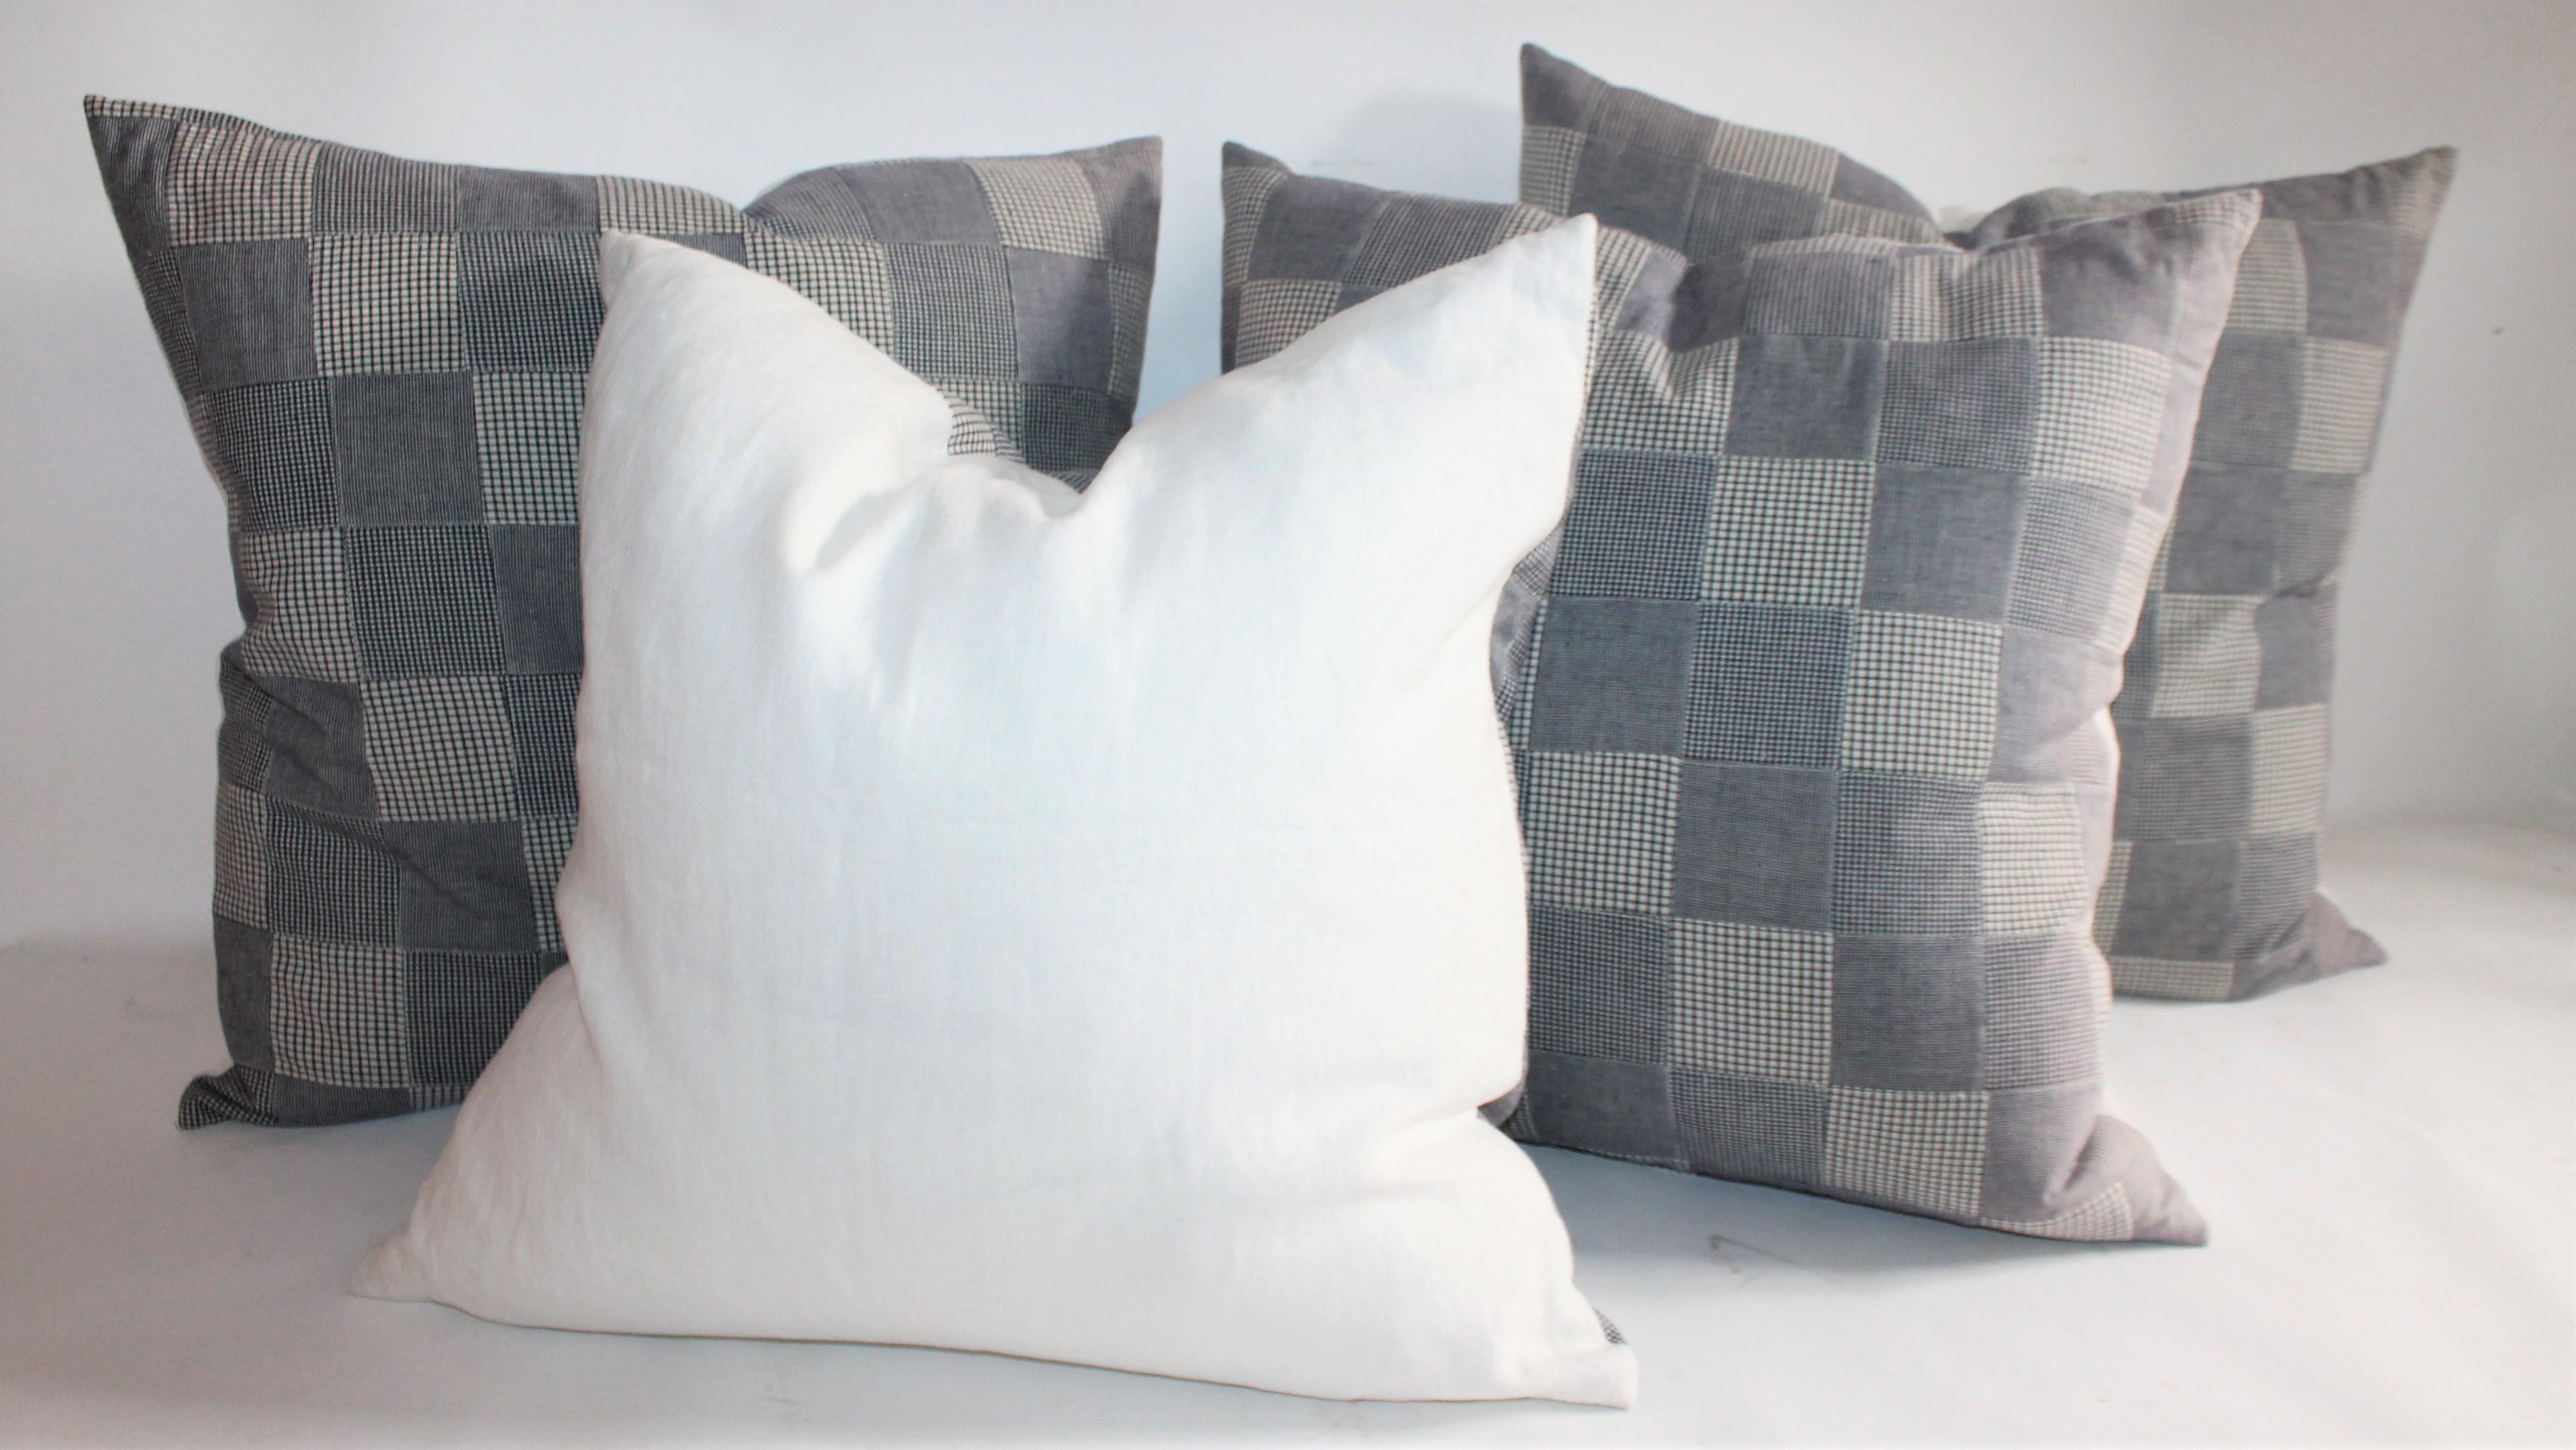 These patch work pillows are small square patches of blue and white check fabric. Collection of four pillows - two pairs.